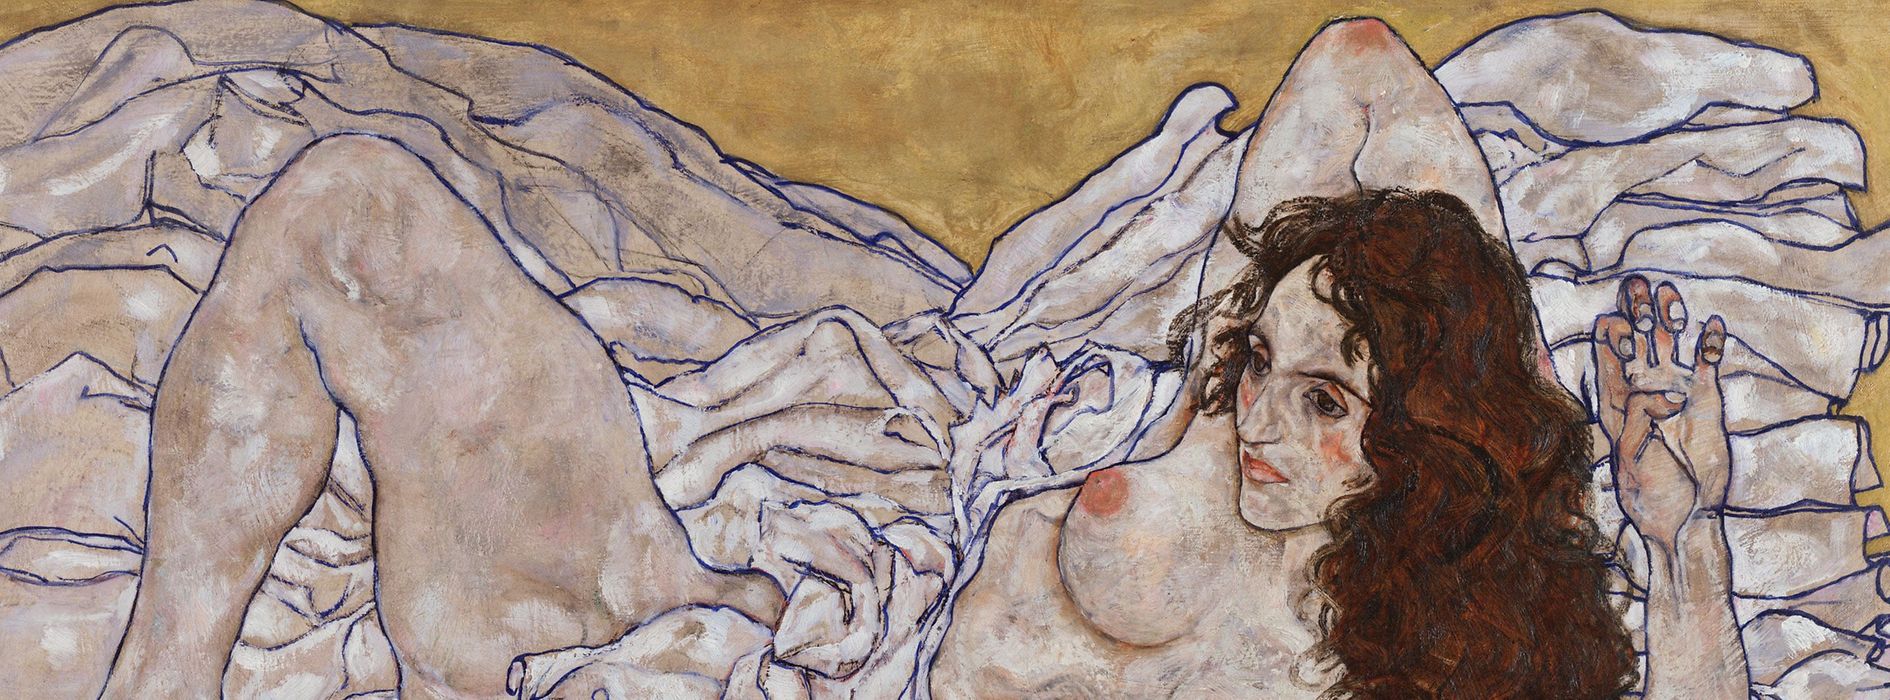 Painting of a naked woman by Egon Schiele